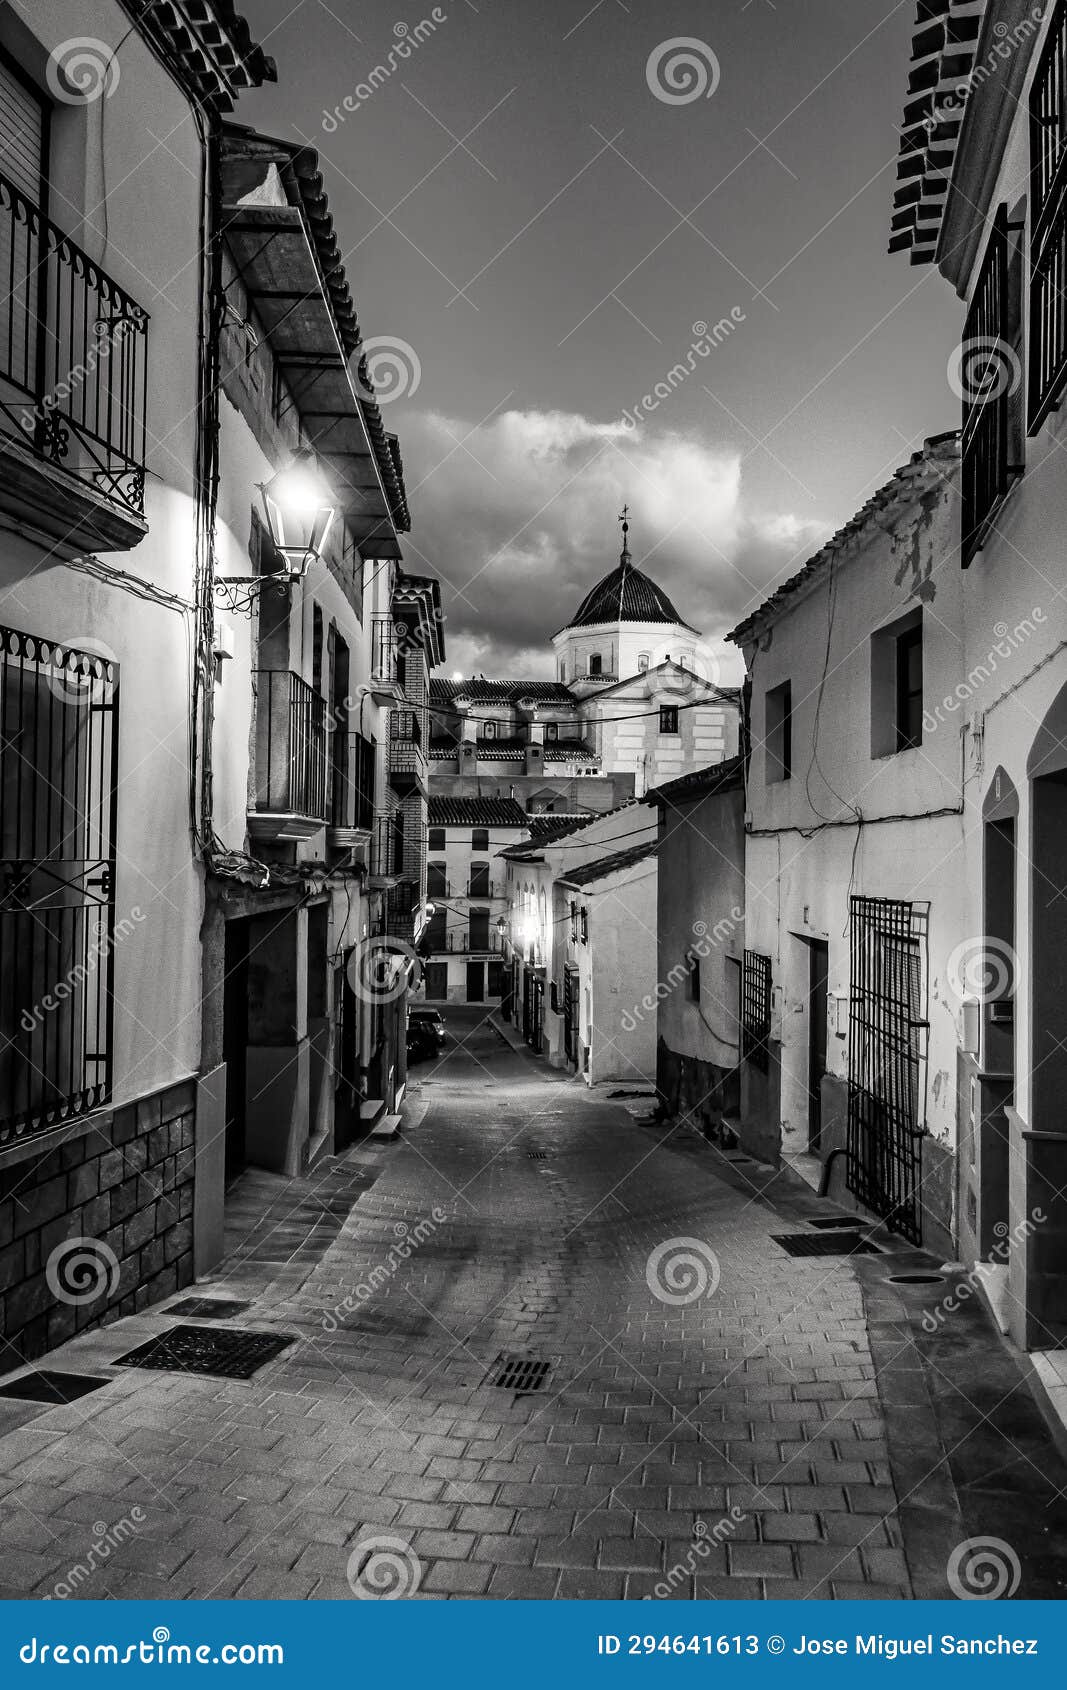 picturesque white village at dusk in andalusia, velez rubio, black and white photo.